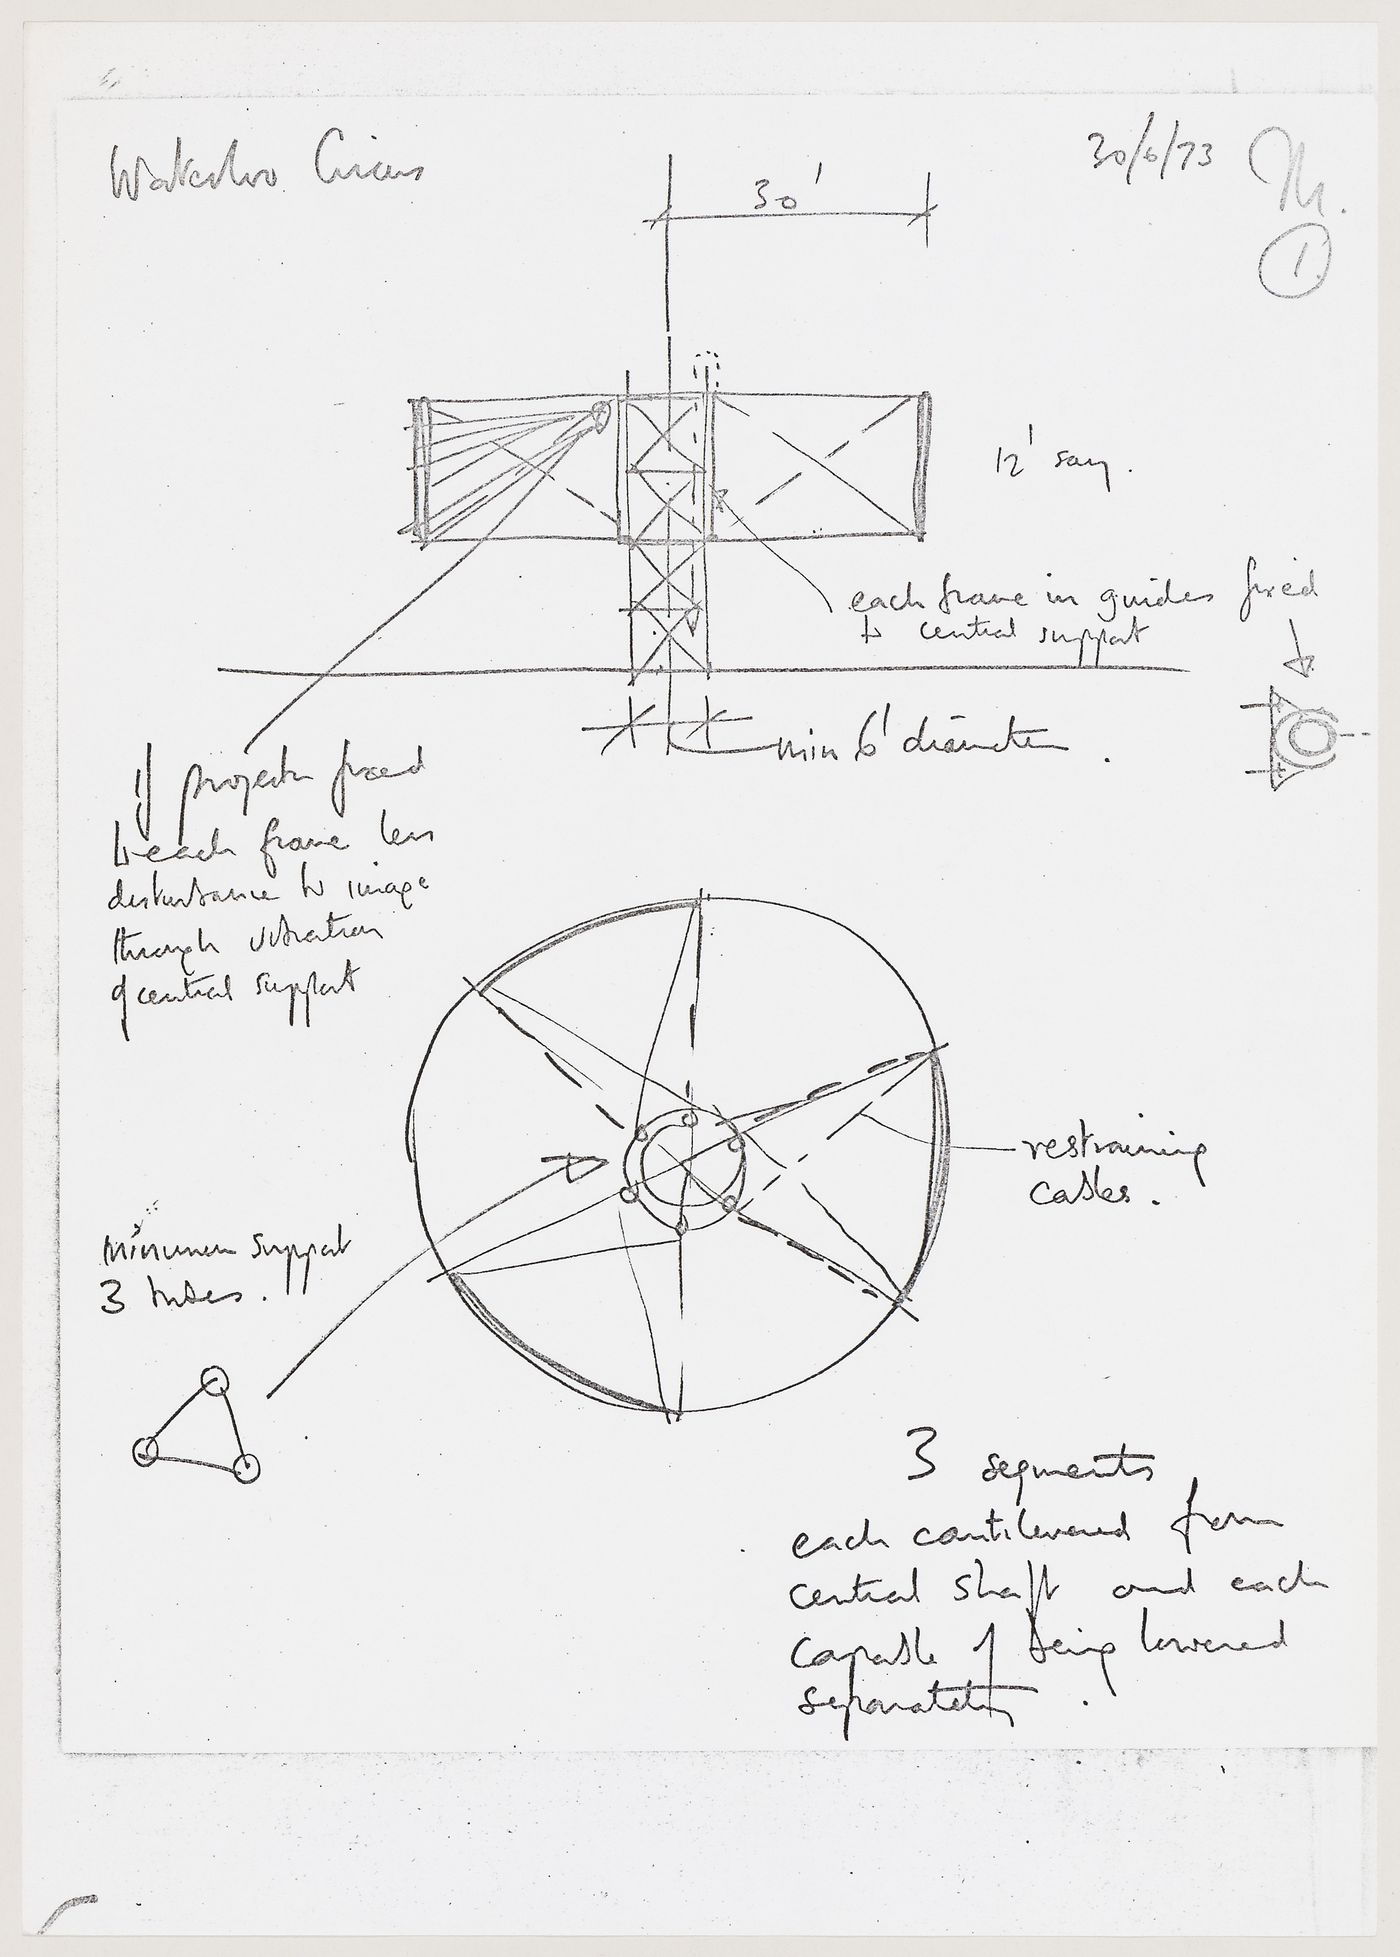 Waterloo Circus: technical sketches